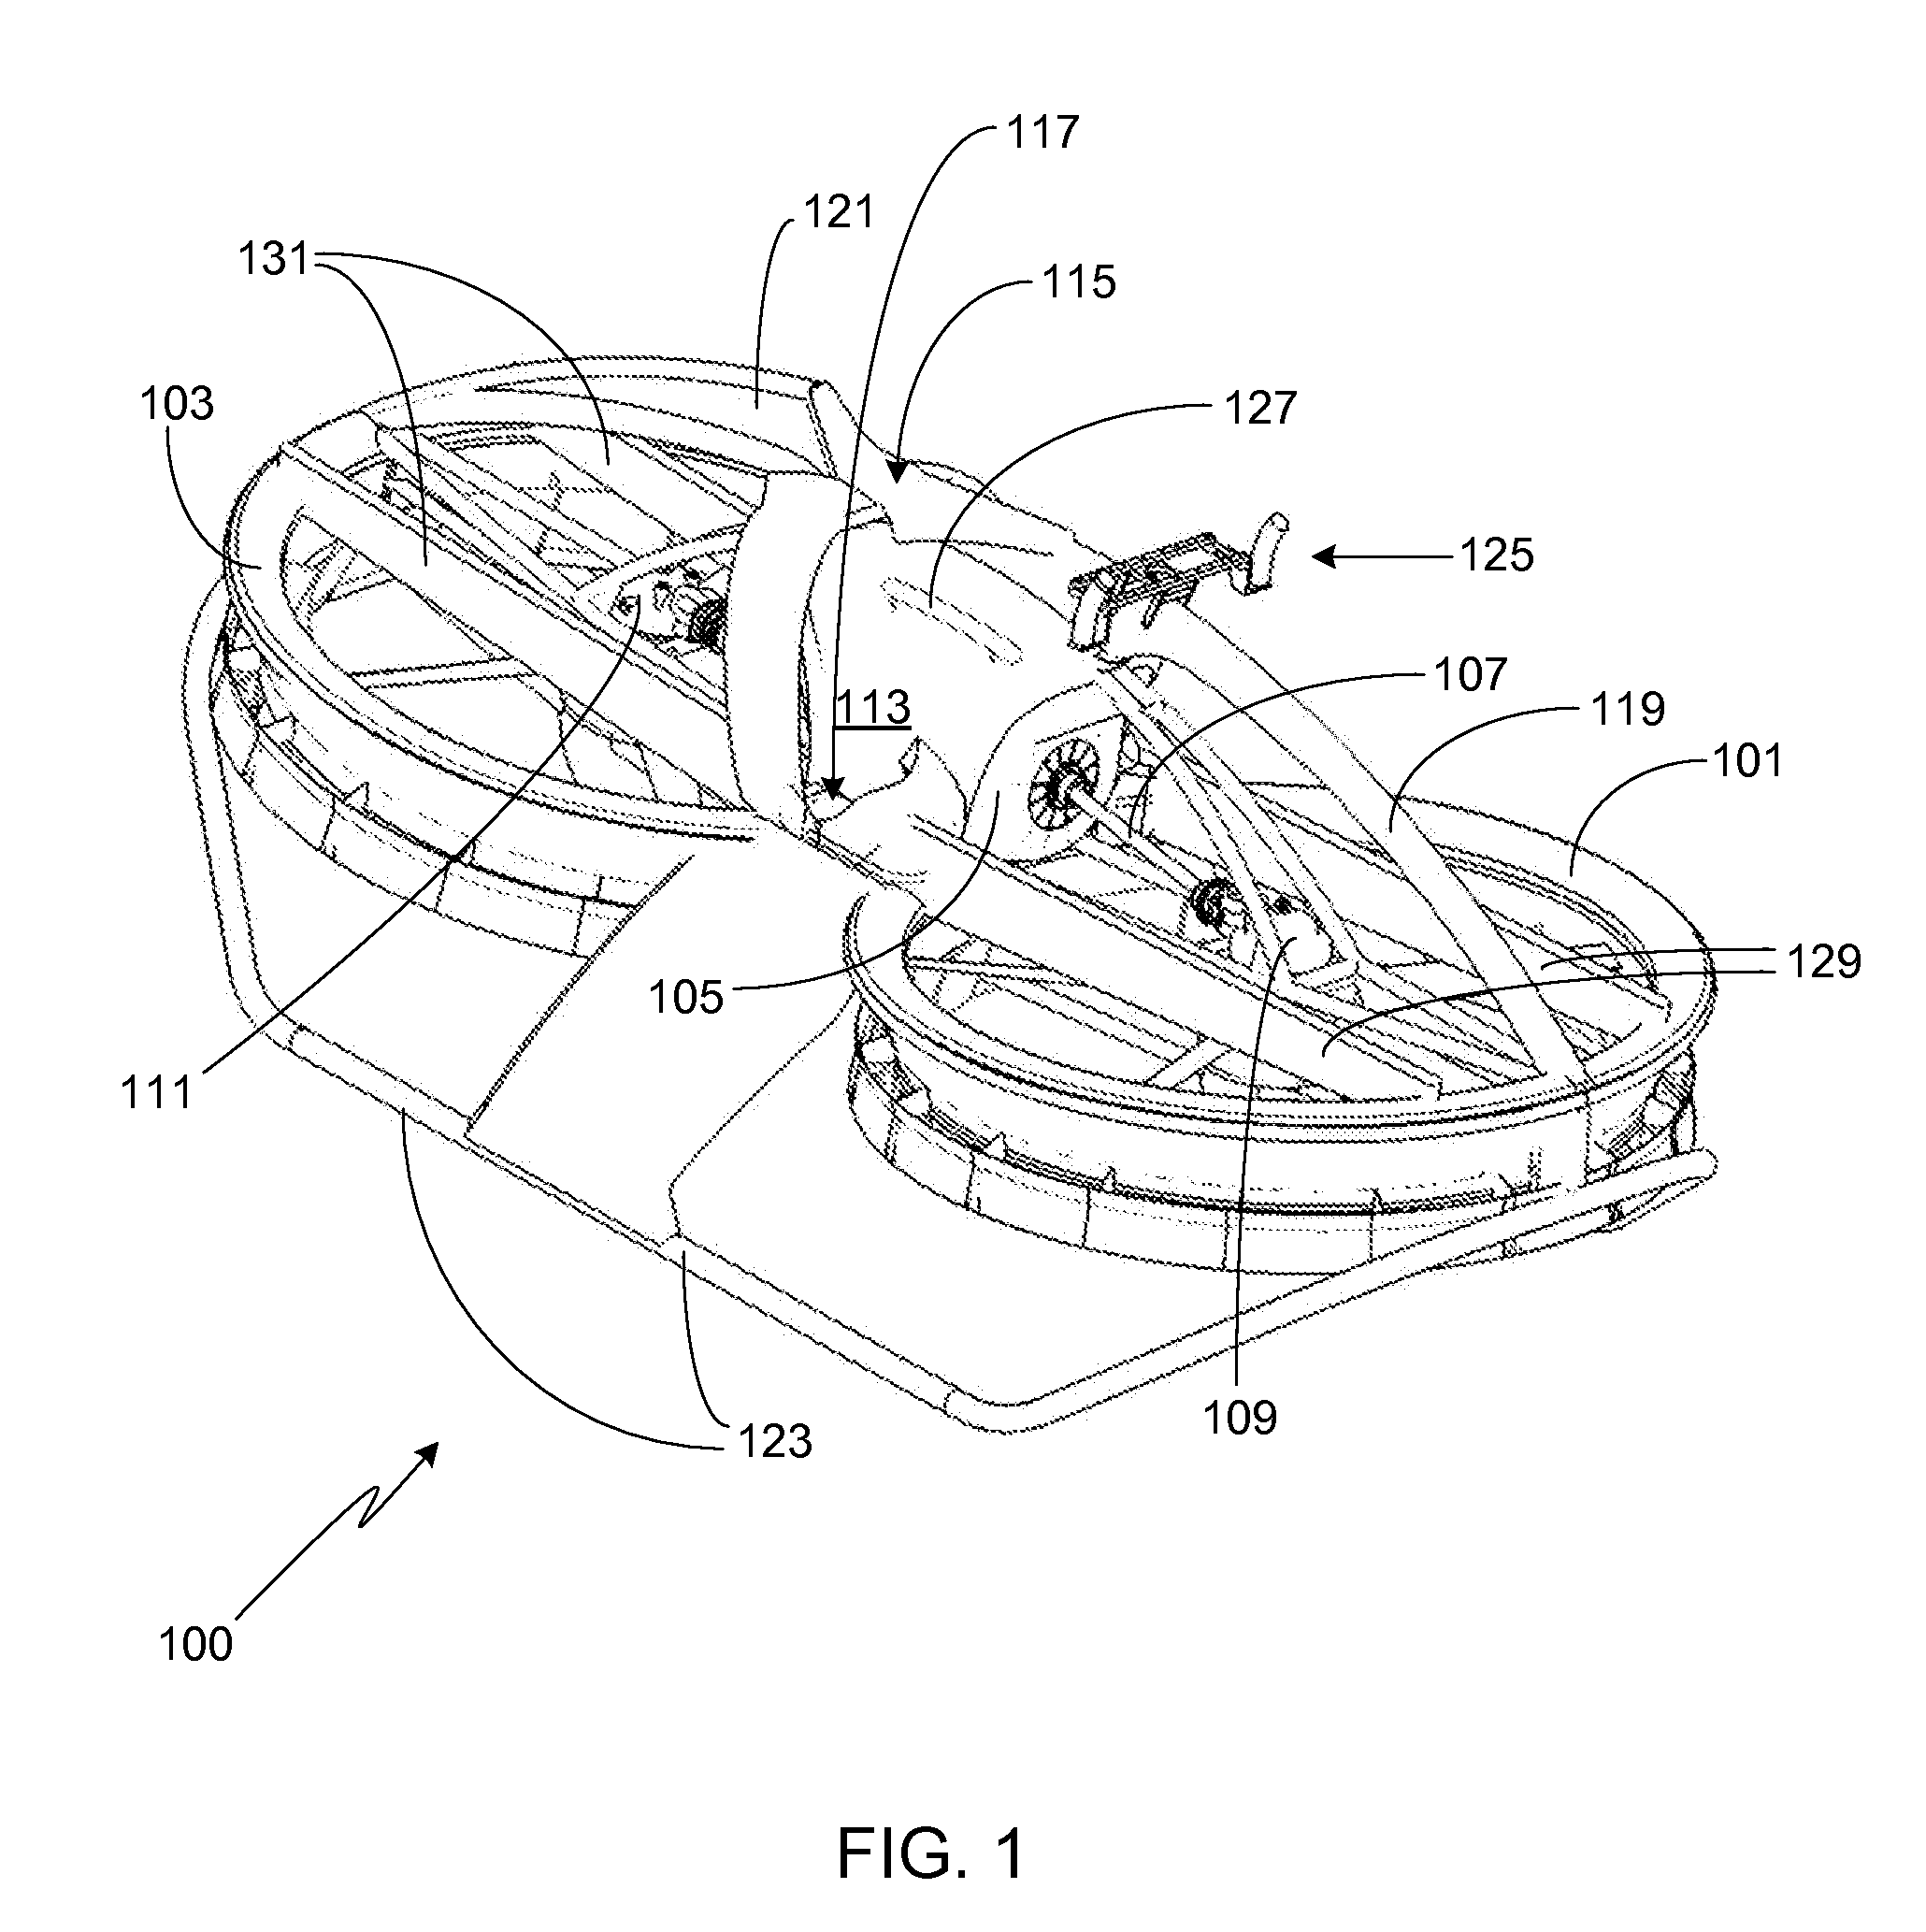 Air-vehicle integrated kinesthetic control system